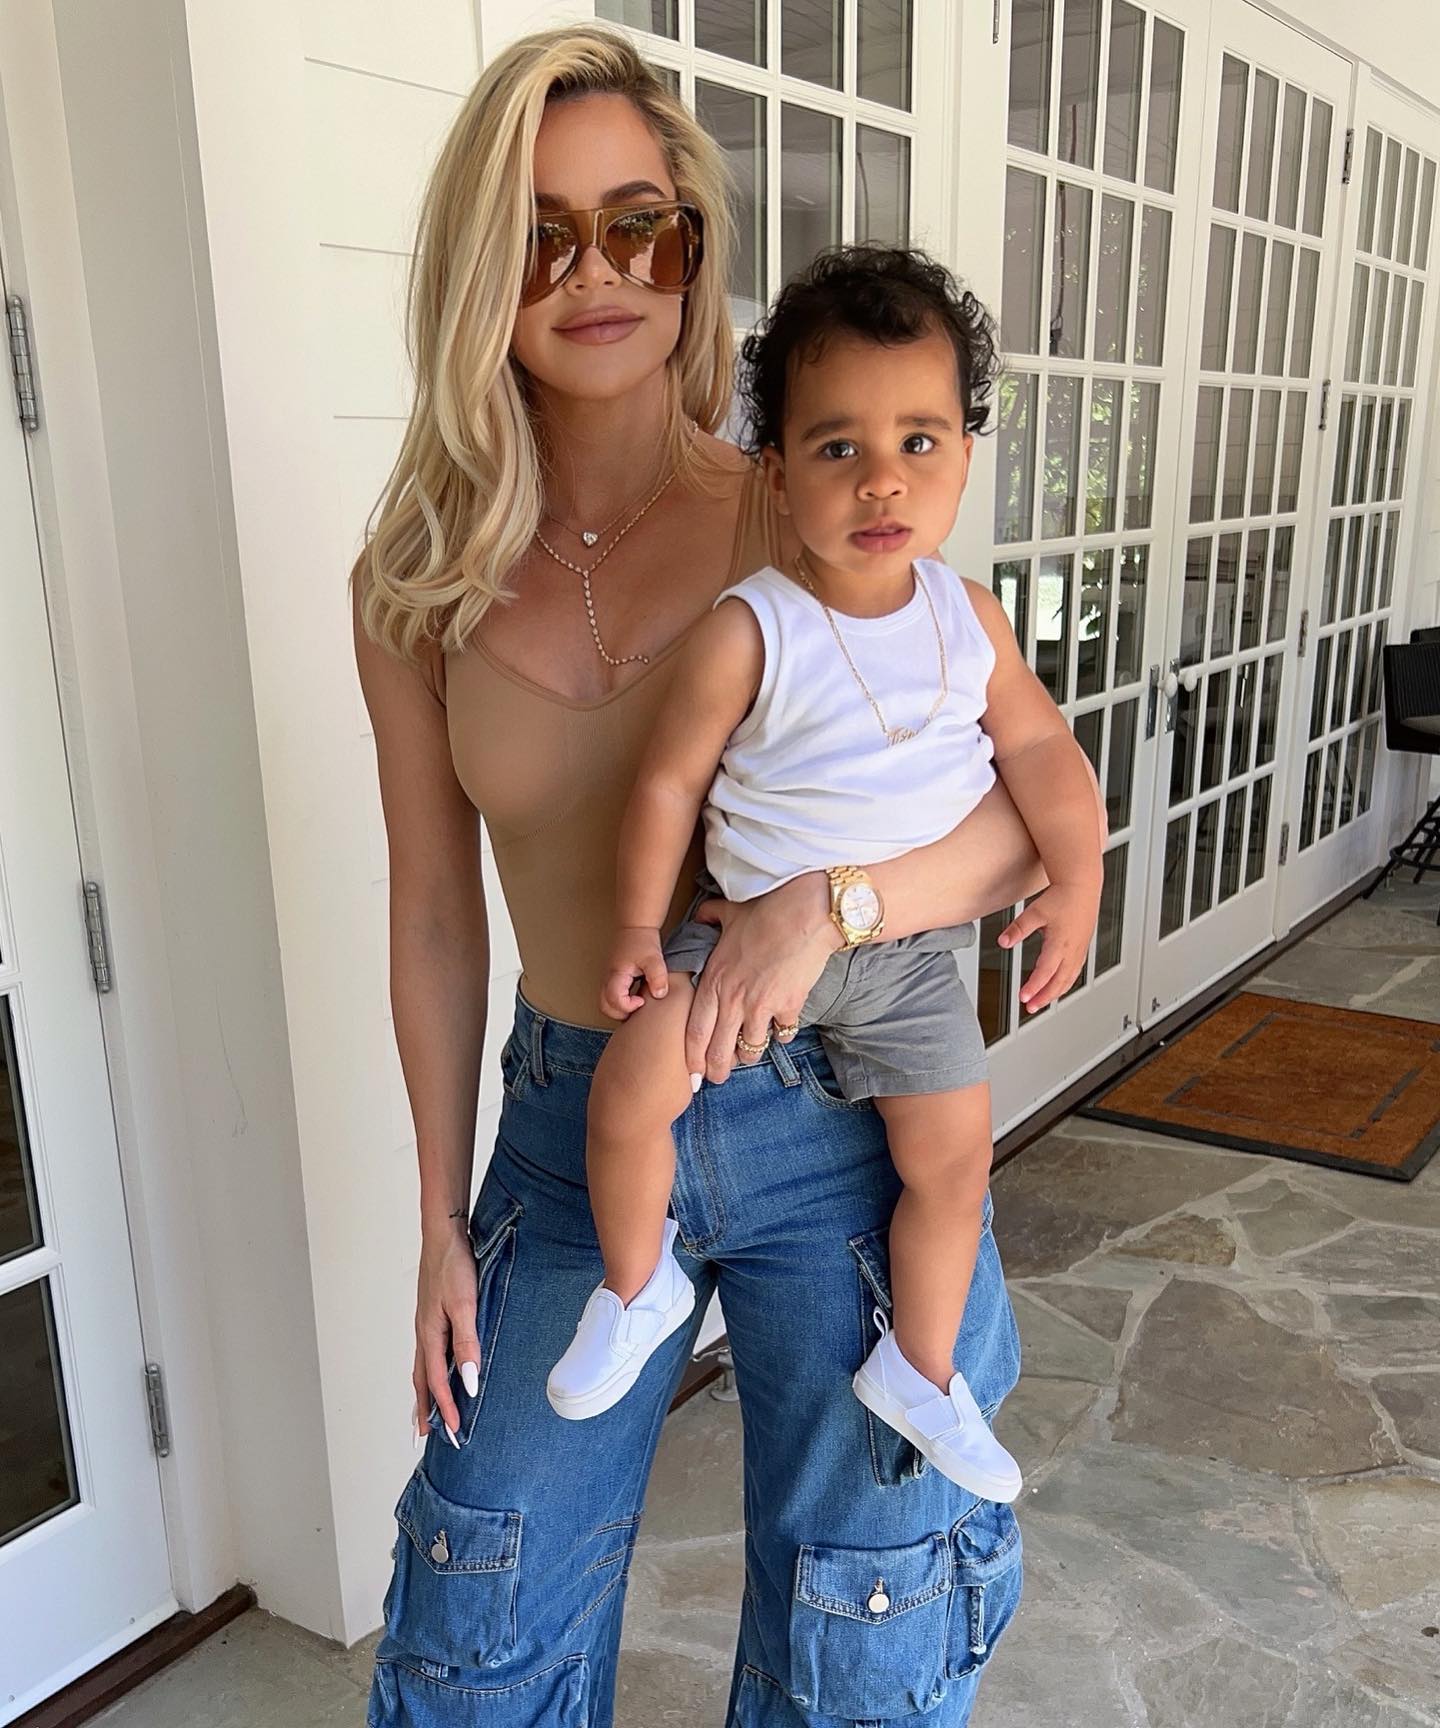 Khloe is also a mom to a one-year-old son, Tatum